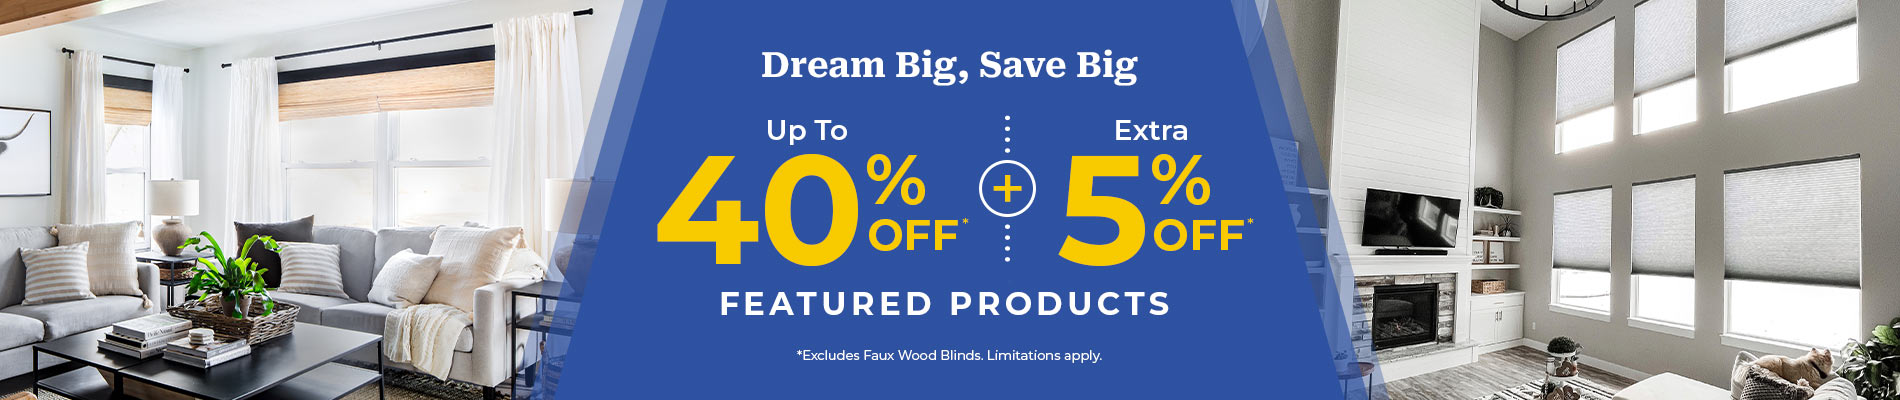 Up To 40% Off* + Extra 5% Off Featured Products* (*Excludes Faux Wood Blinds)